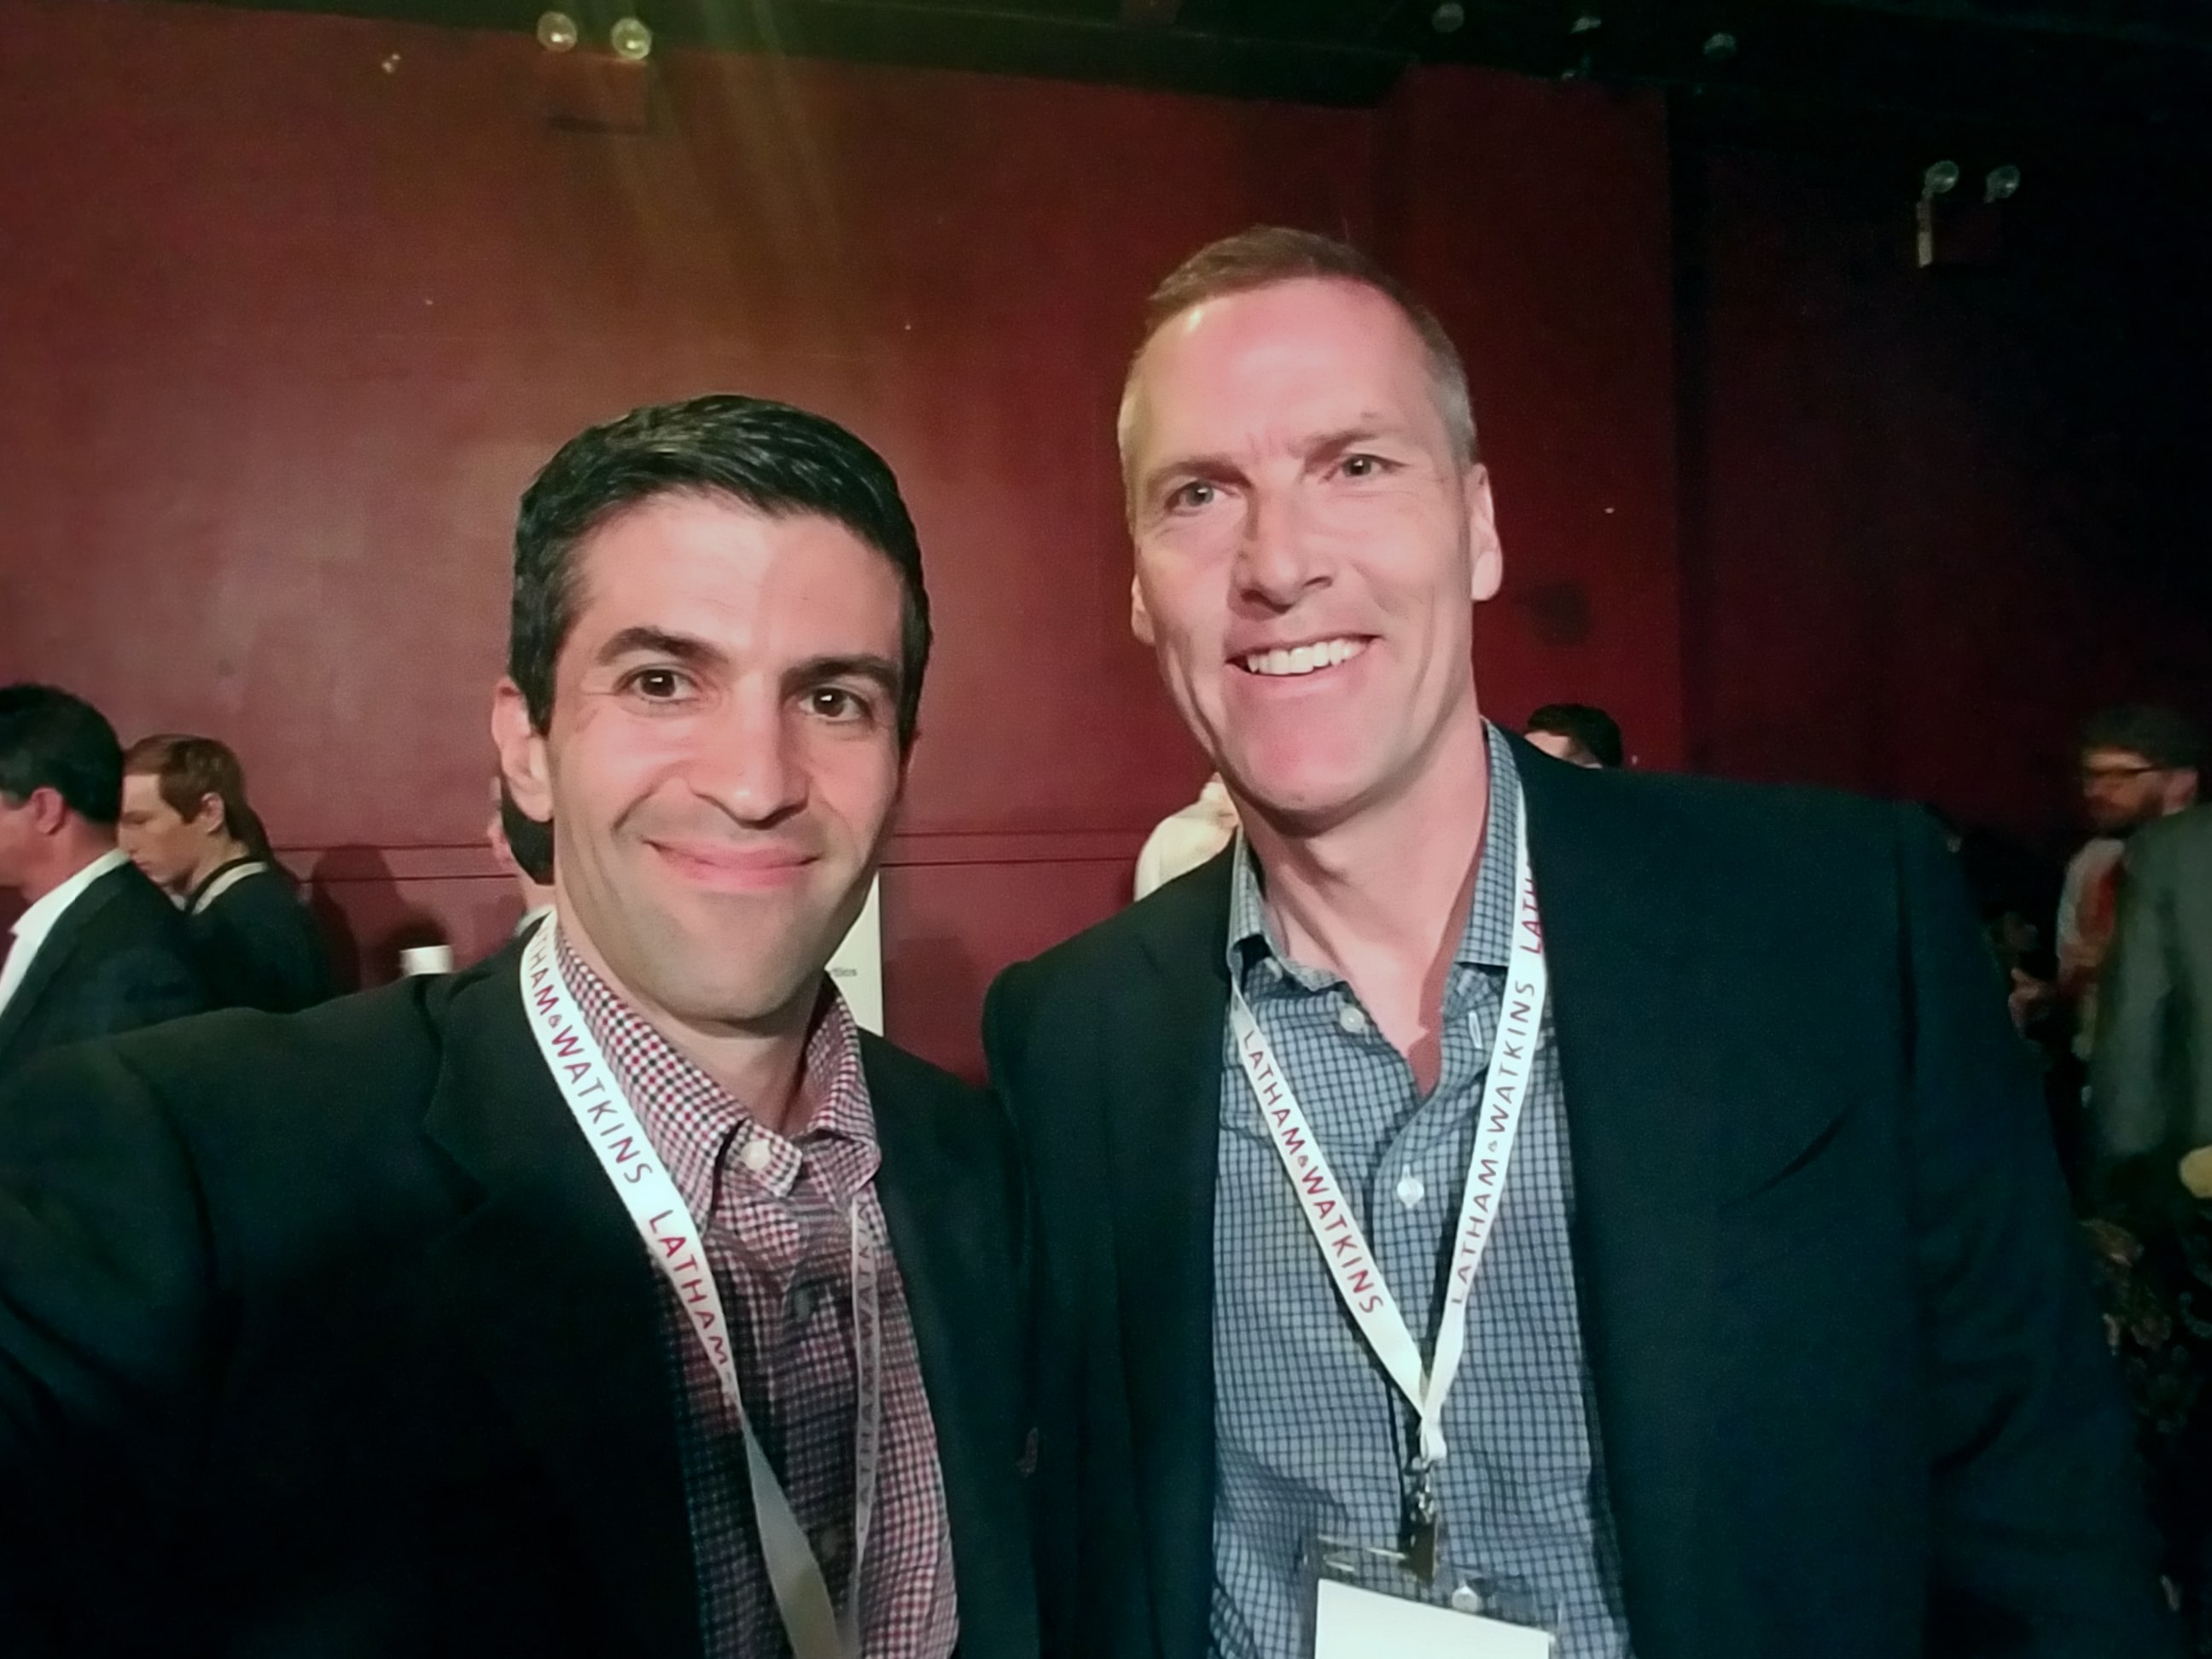 From left to right: Steven Hatzakis, Editor at FinanceMagnates.com and Tim Hockey, incoming CEO of TD Ameritrade. Selfie photo taken at Empire Startups Fintech NY event on April 26, 2016. Source: Steven Hatzakis